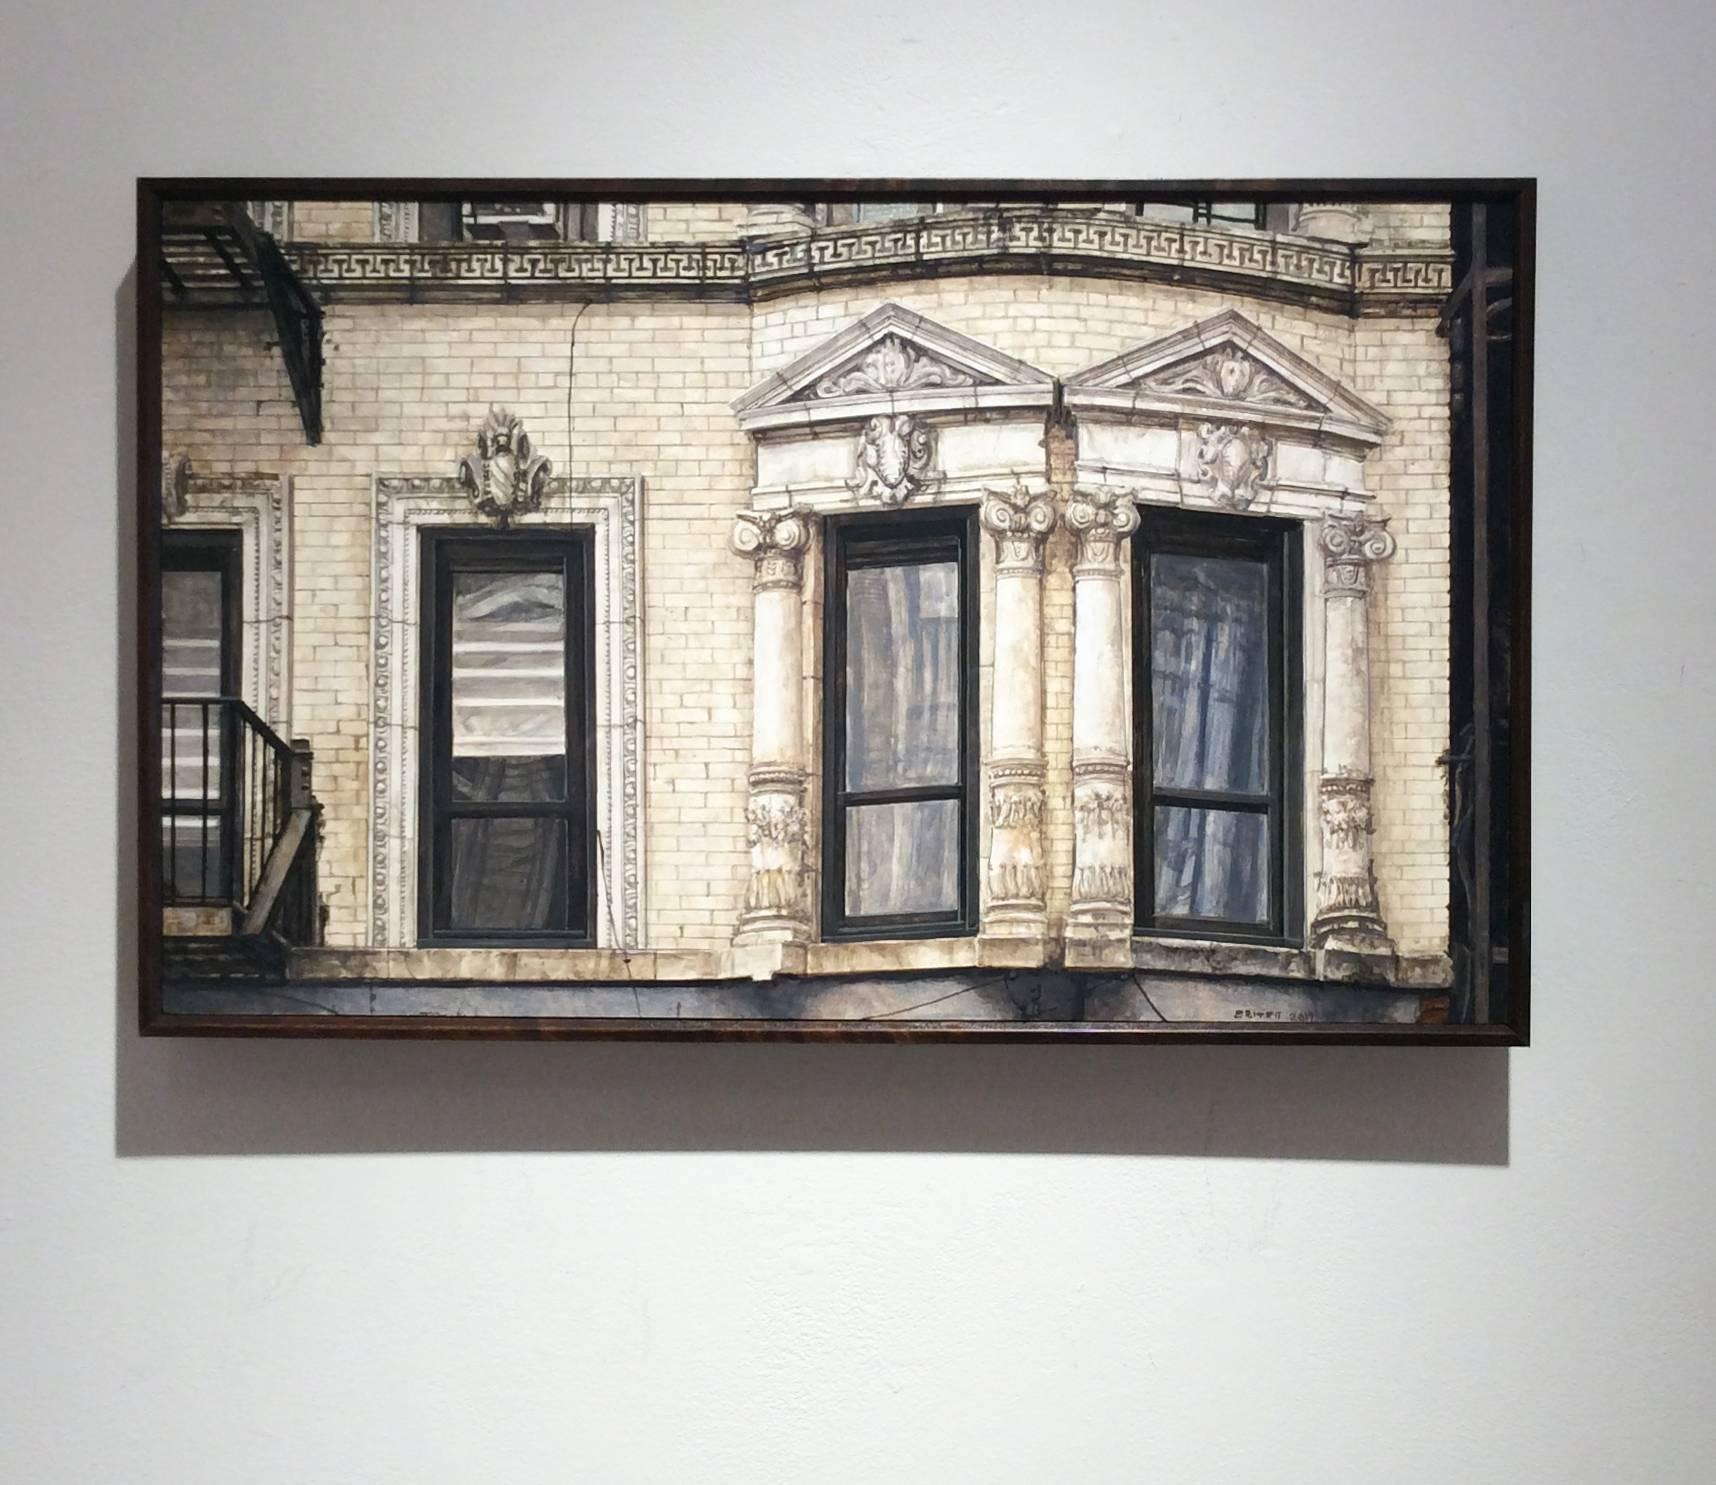 oil on wood in artist made frame
12 x 18 inches 
$1,800

This contemporary, realistic oil painting of a New York City building was painted by Richard Britell in 2017. Employing his mastery of the troupe l'oeil technique, Britell paints the light